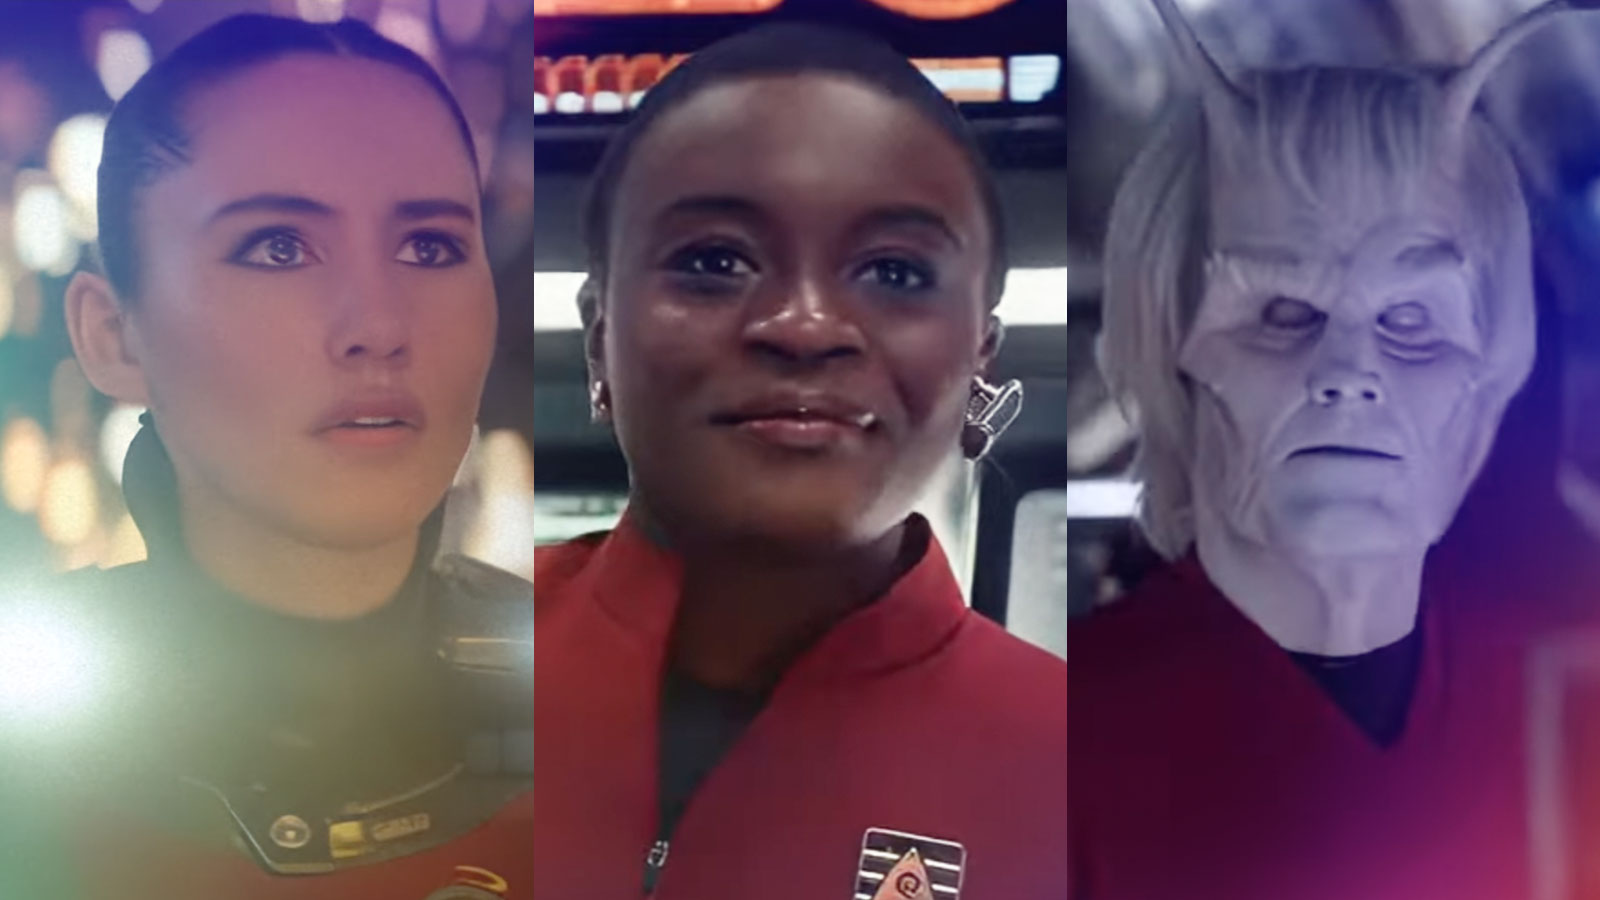 Star Trek: Strange New Worlds character promos introduce us to the cast of the new series